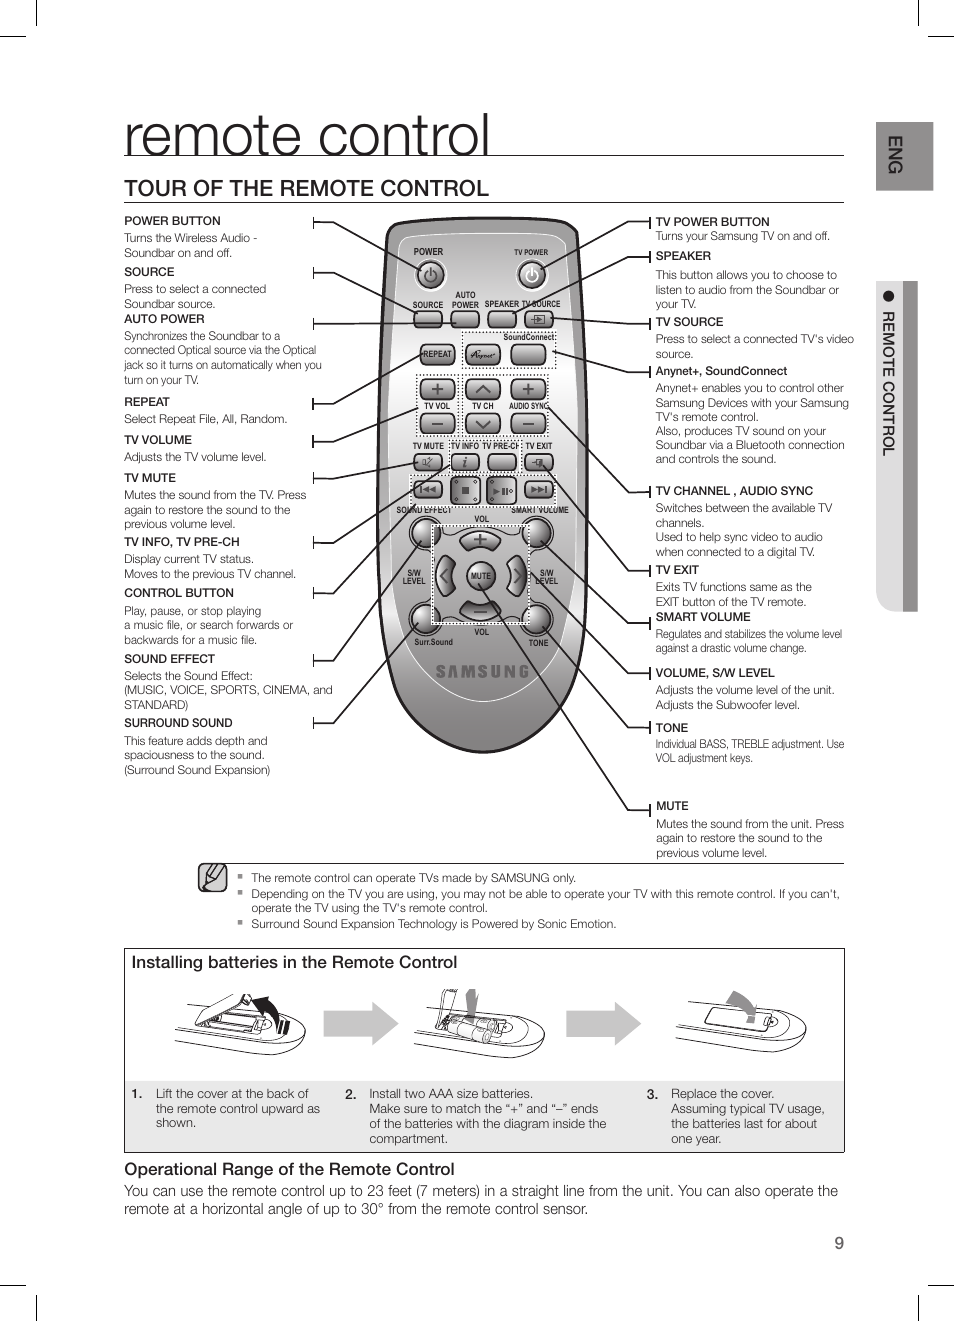 Remote control, Tour of the remote control, Installing batteries in the